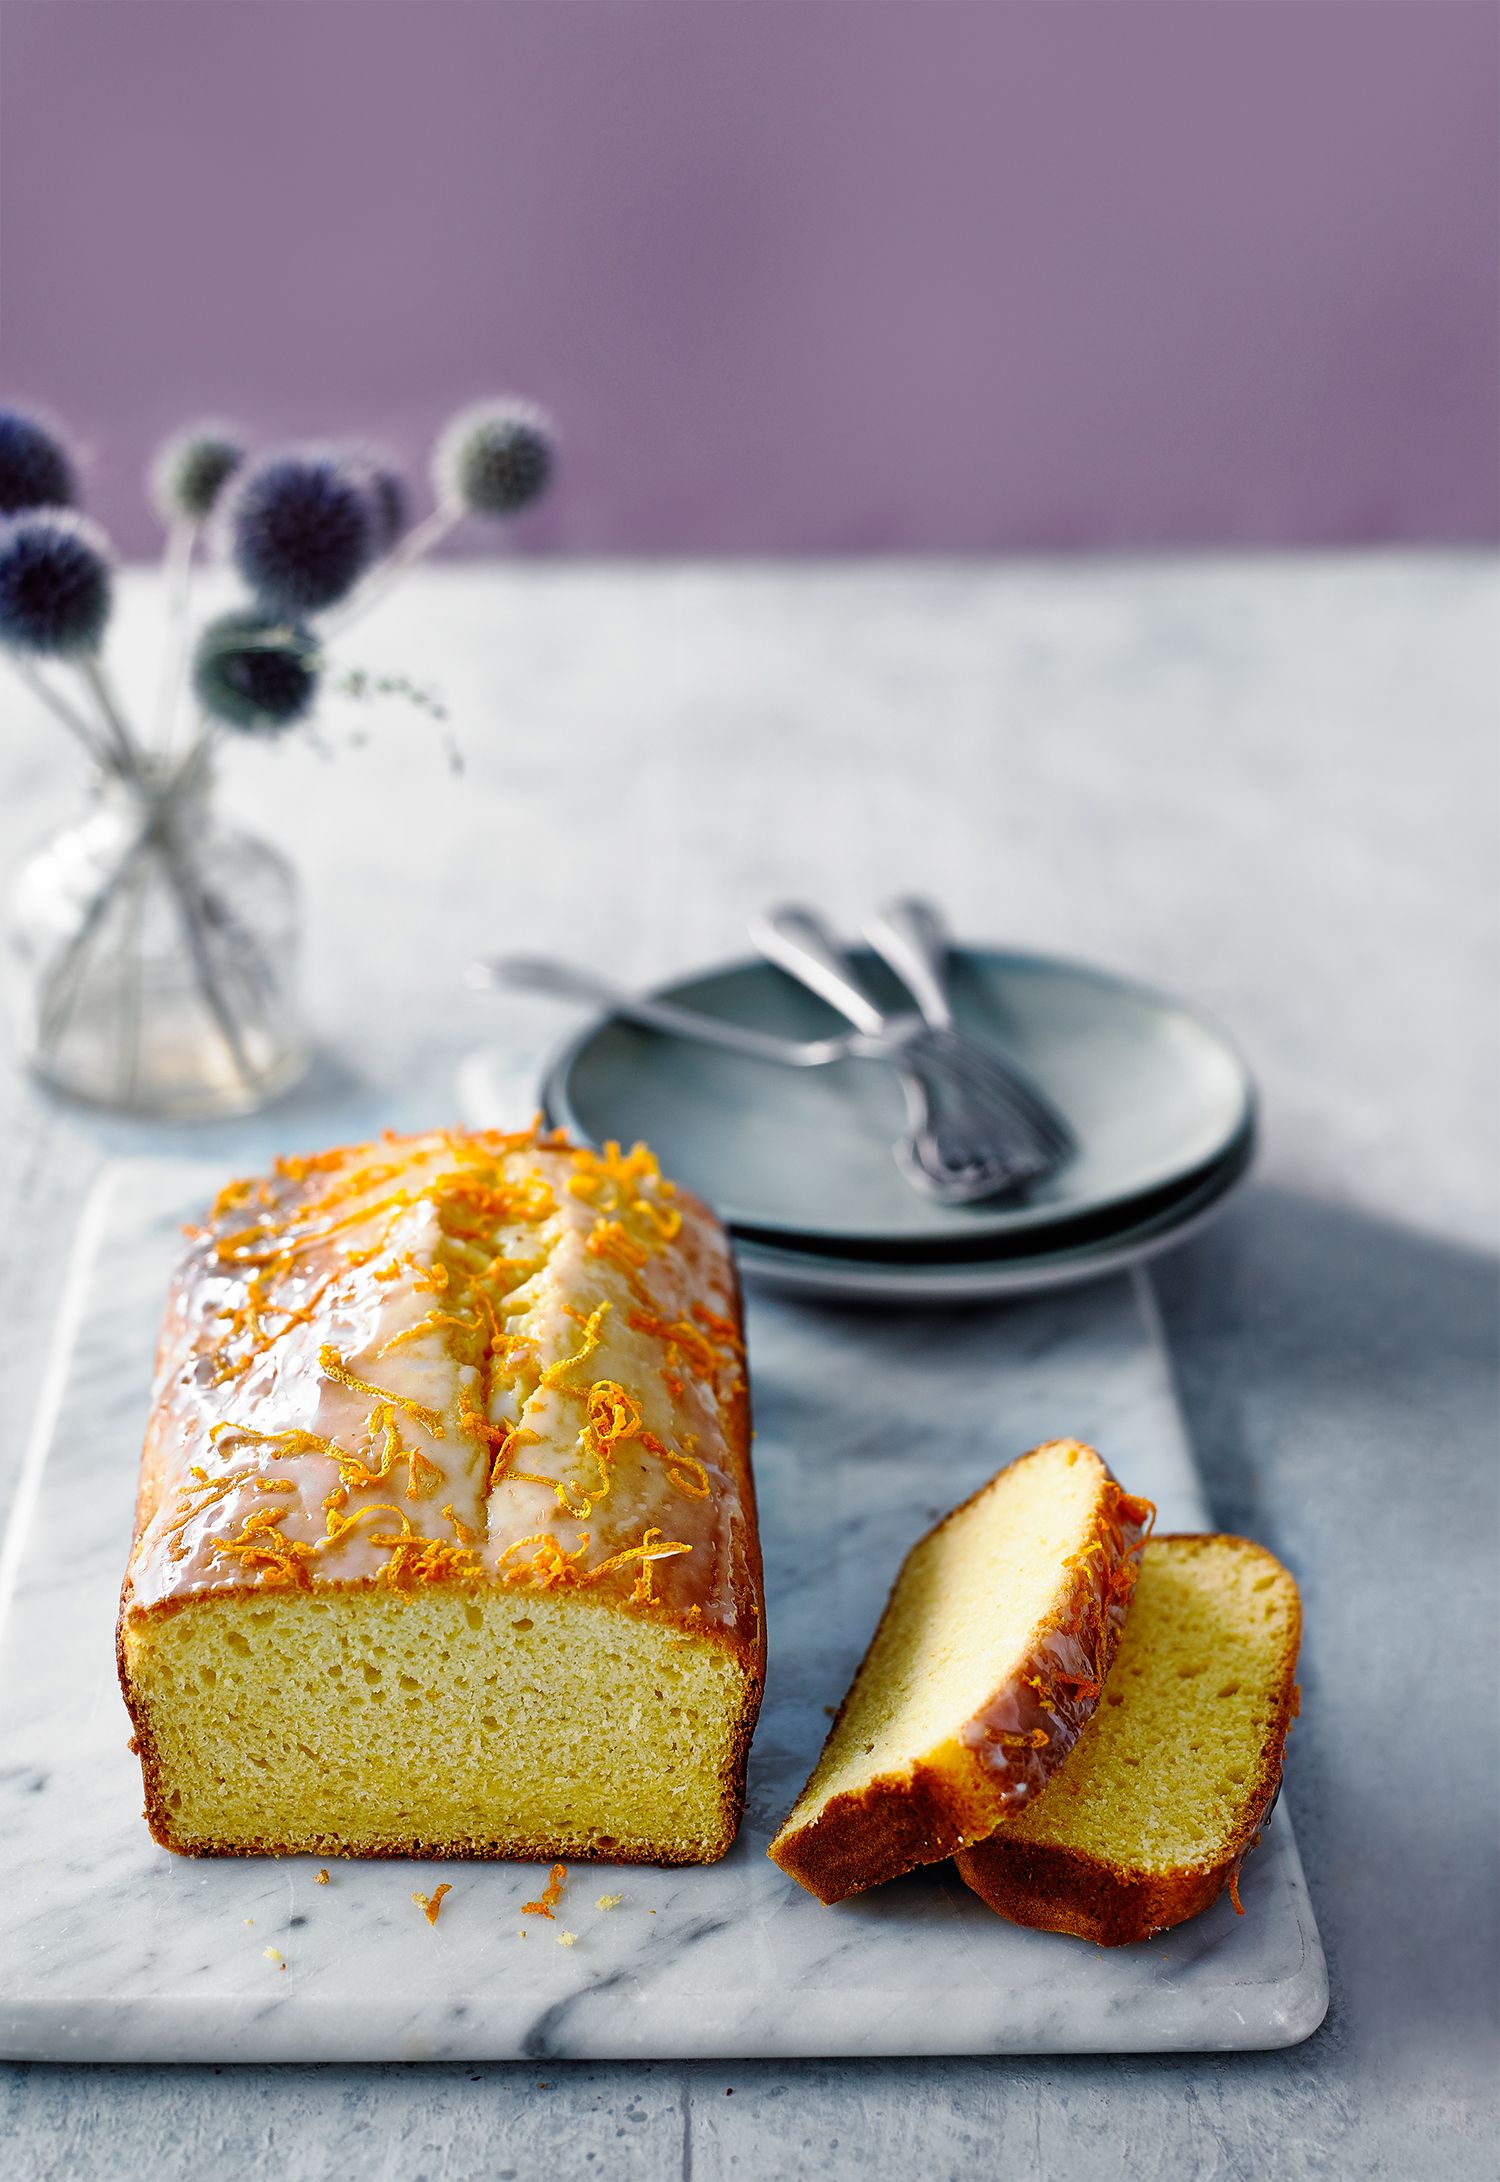 How to make the best Madeira cake - easy recipe